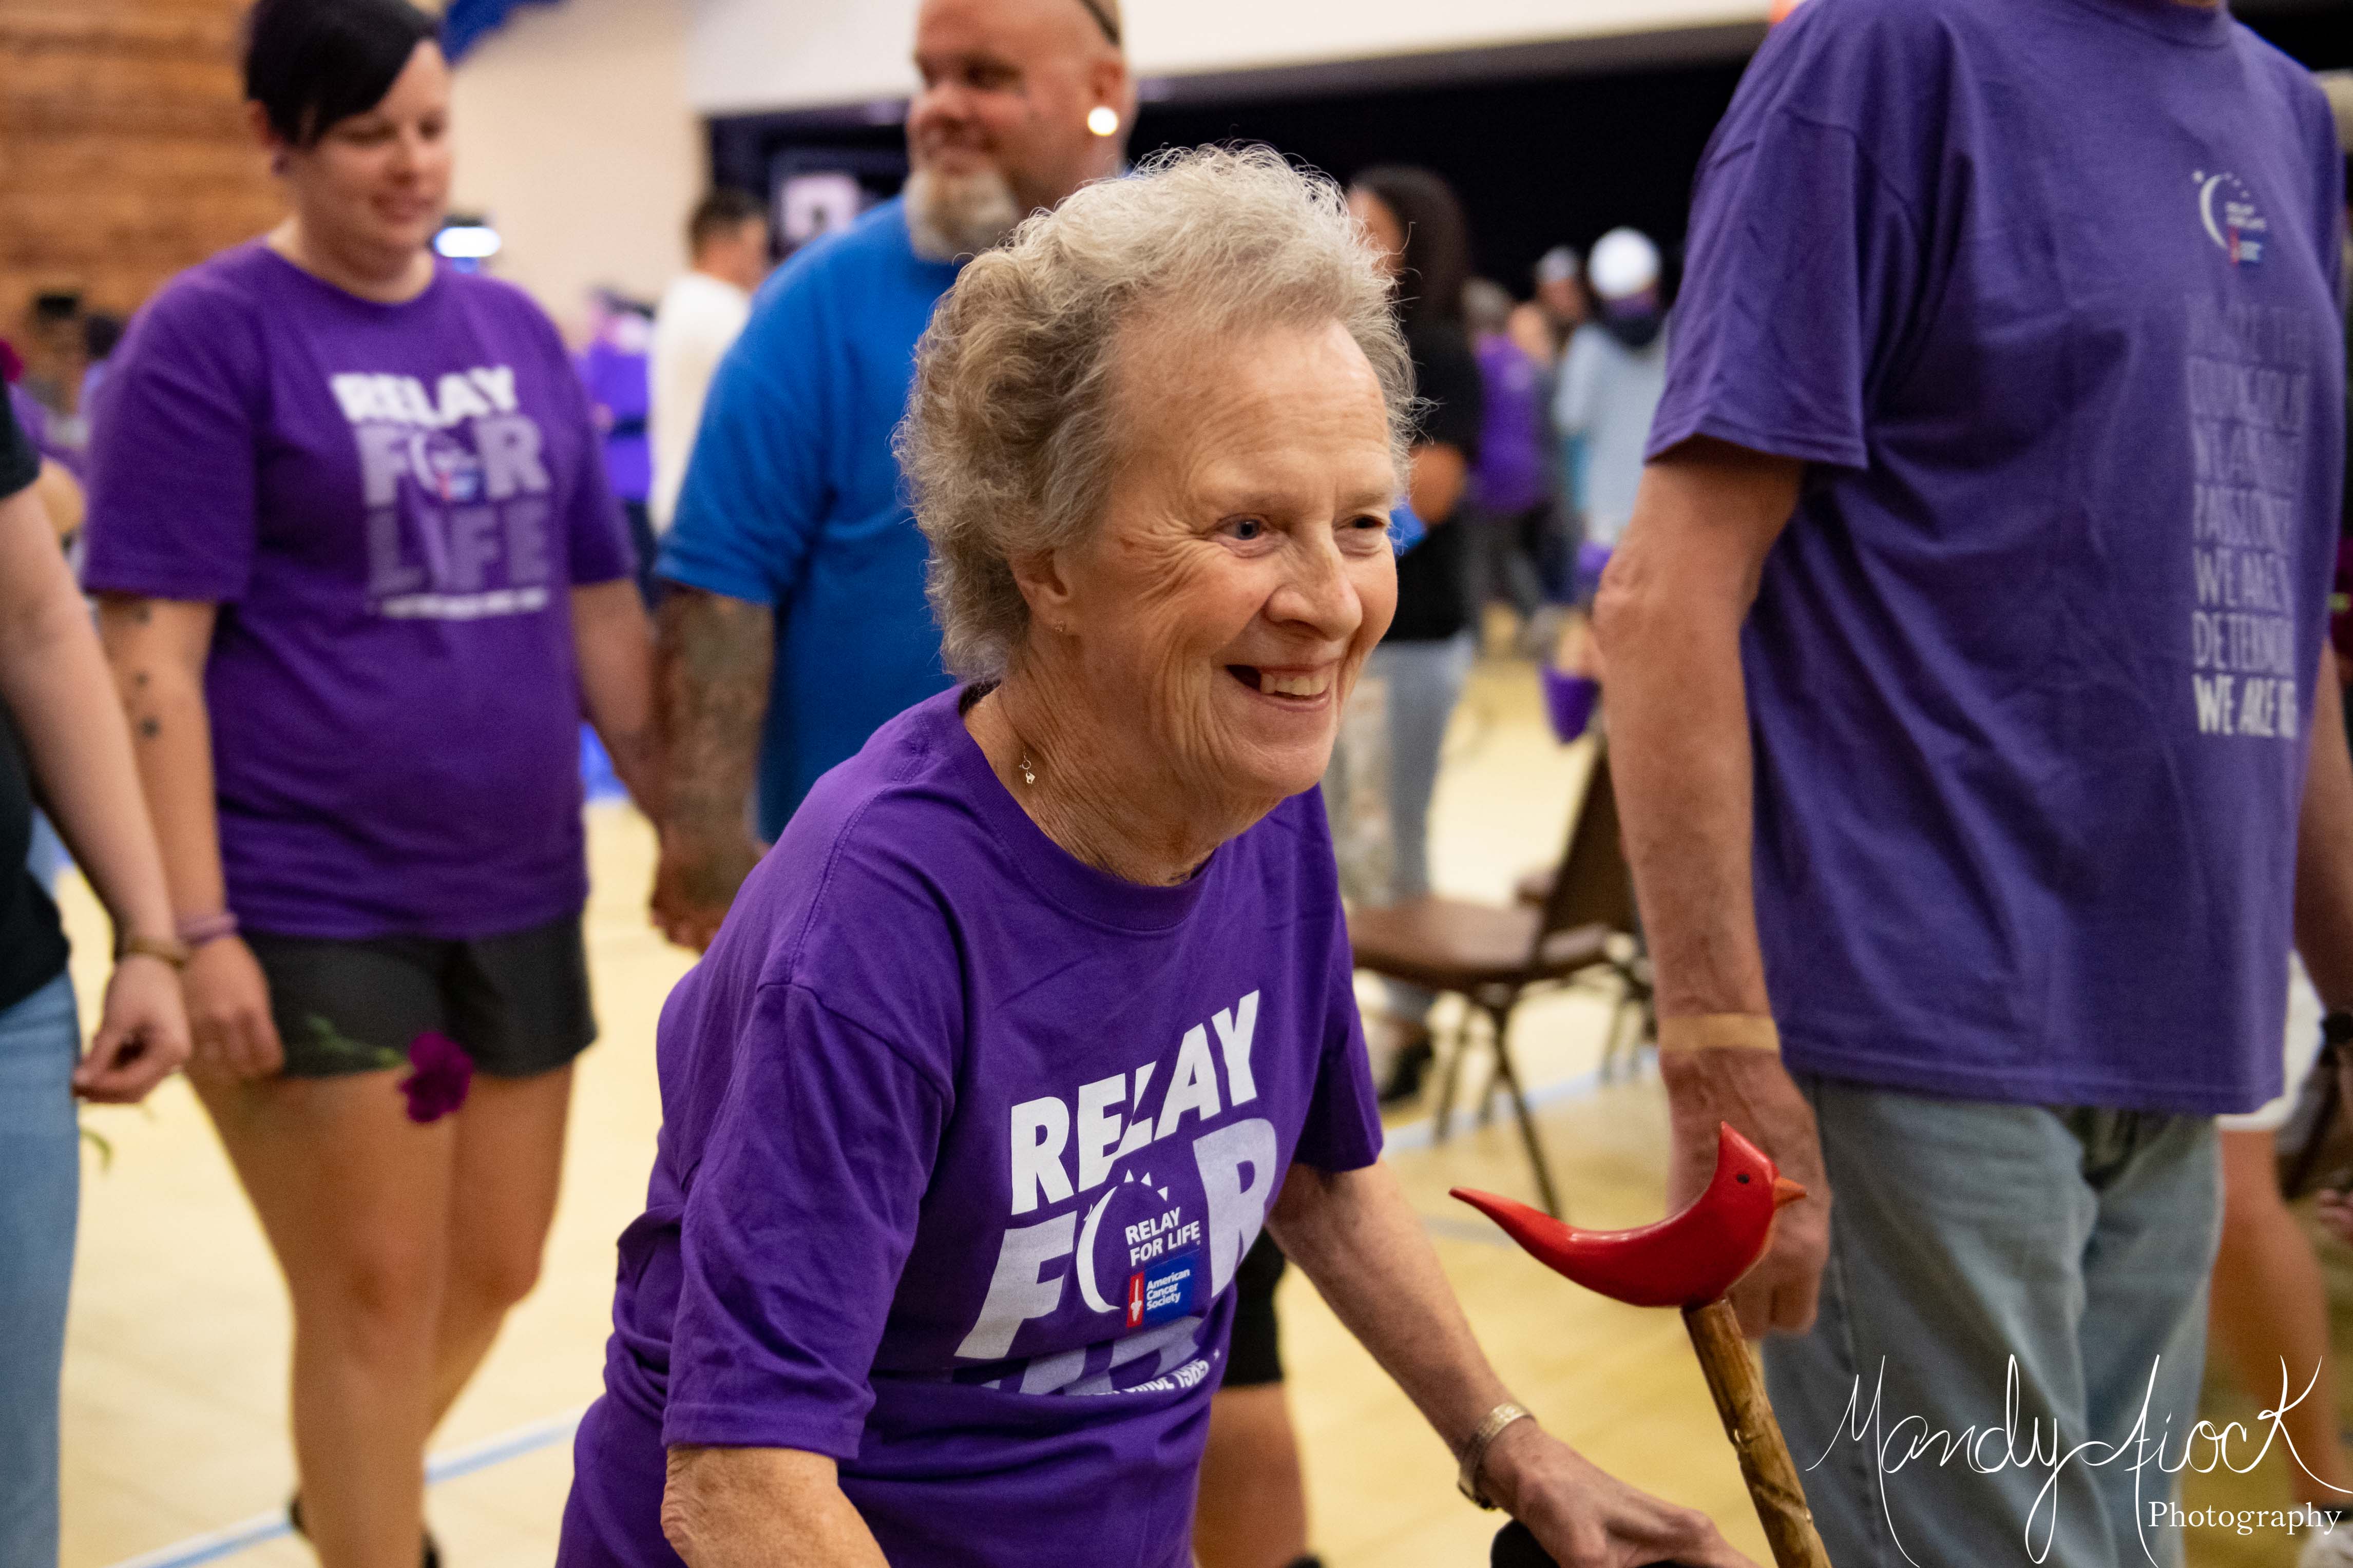 Photos from 2019 Relay For Life by Mandy Fiock Photography